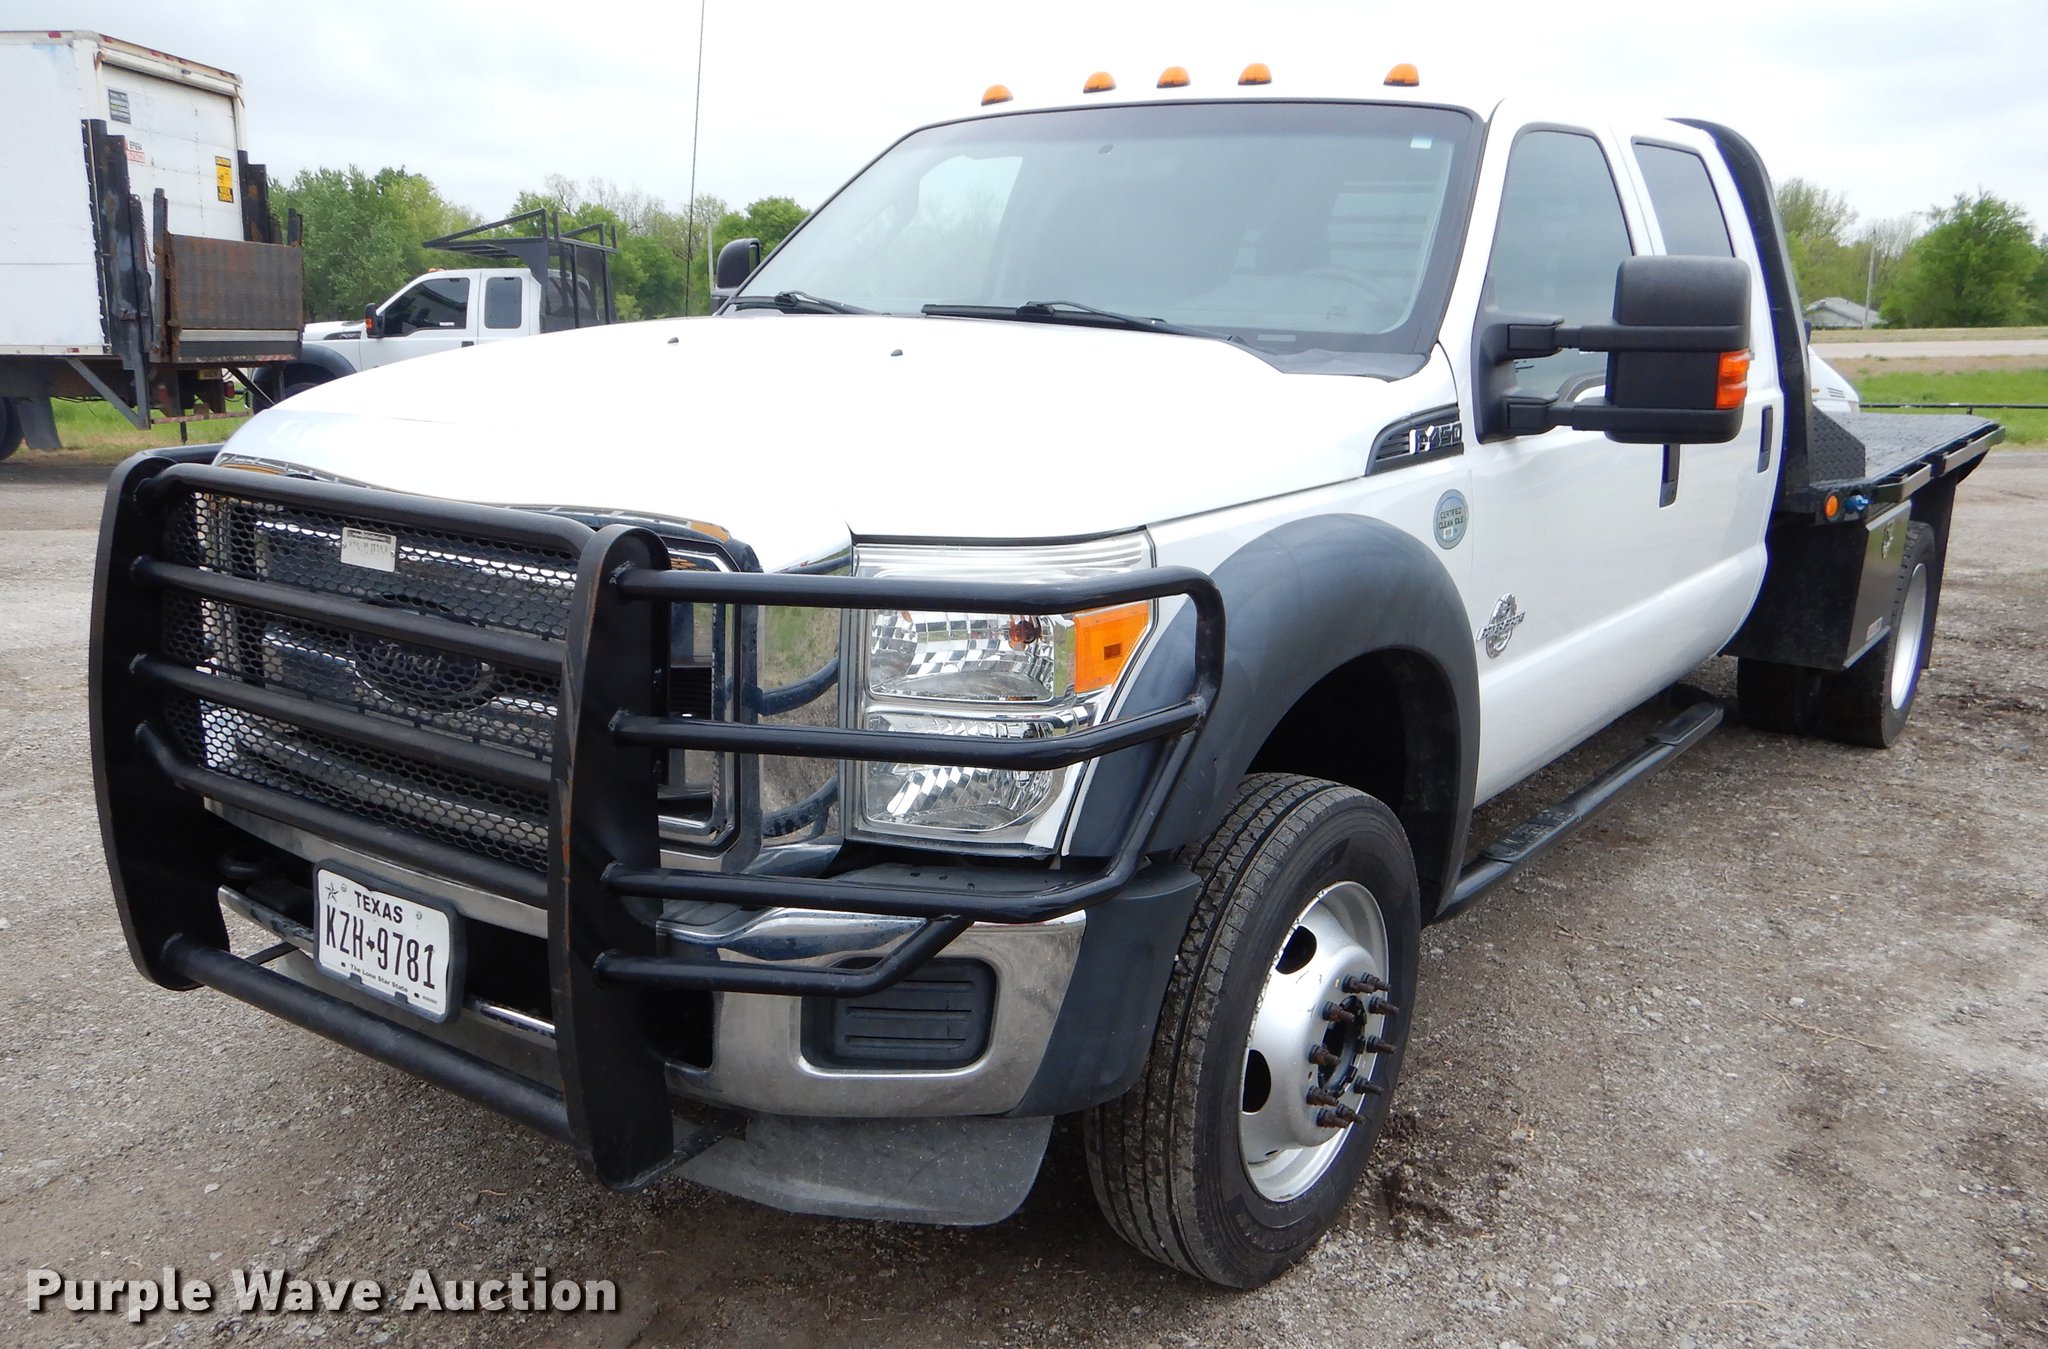 2012 Ford F450 Super Duty Crew Cab flatbed truck in Collinsville, OK | Item  FH9321 sold | Purple Wave